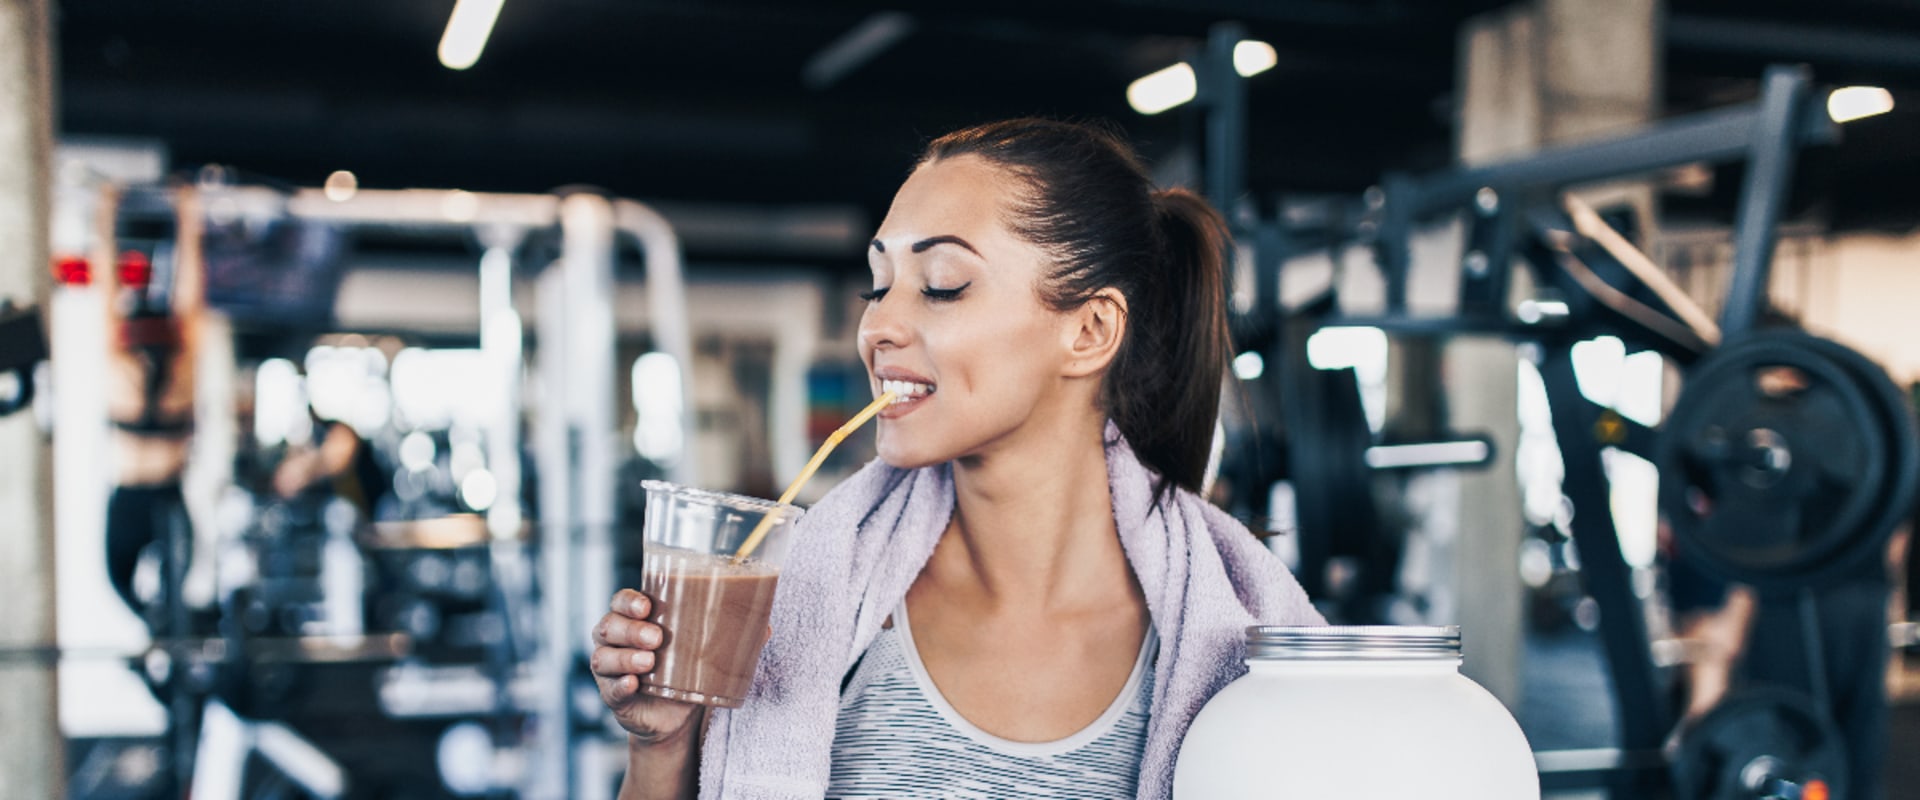 Can You Have Too Much of a Good Thing? An Expert's Perspective on Protein Powder